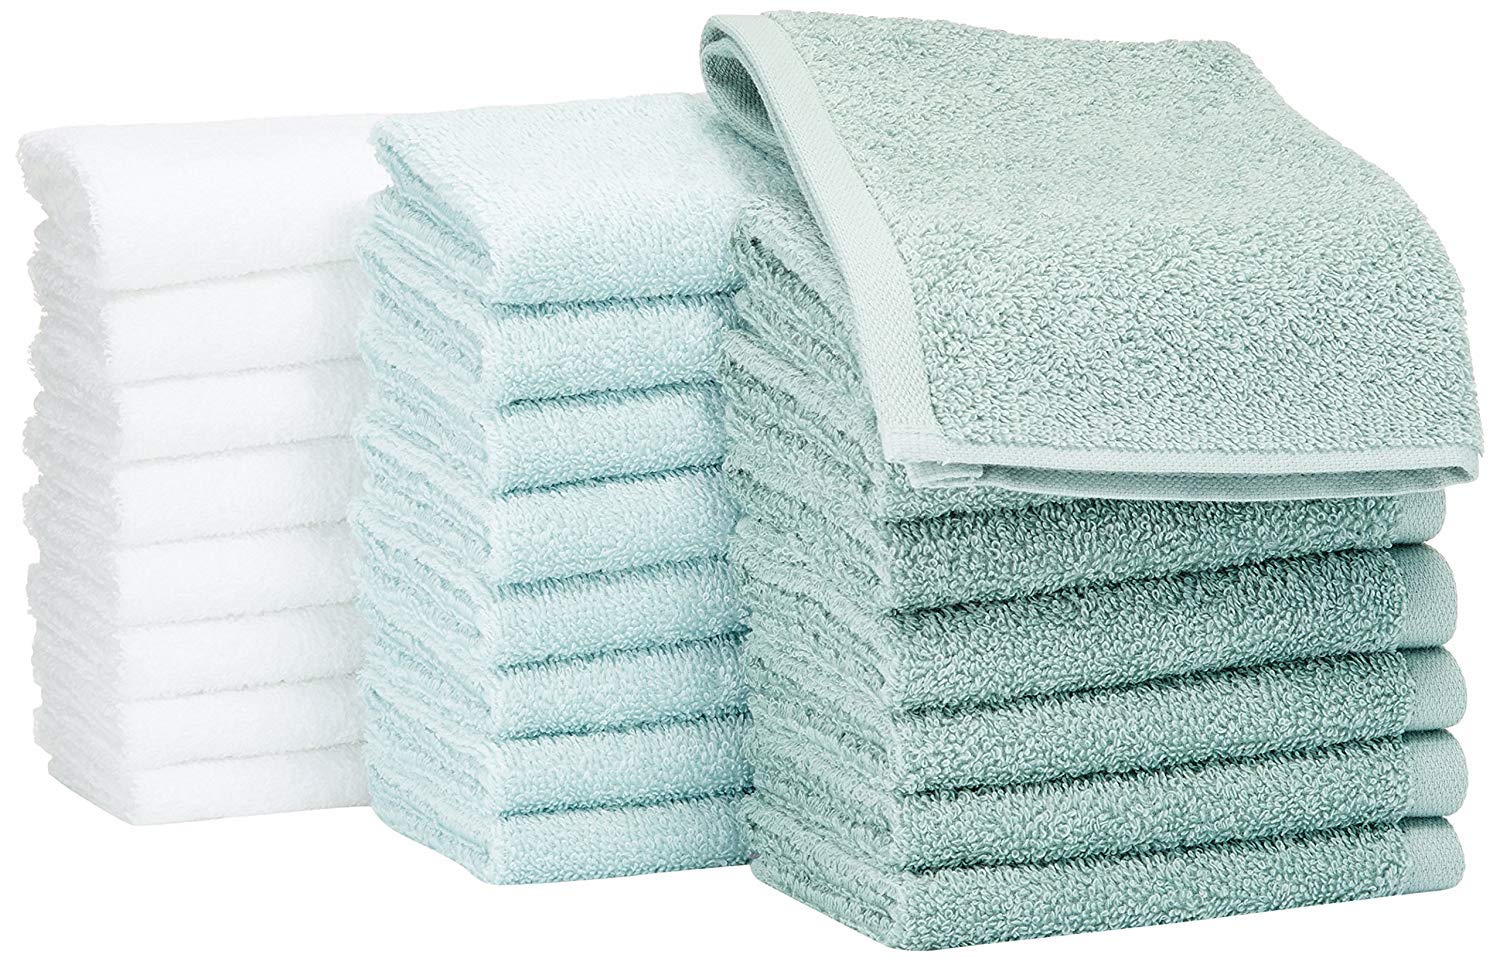 Amazon Basics Fast Drying, Extra Absorbent, Terry Cotton Washcloths - Pack of 24, Seafoam Green/Ice Blue/White, 12 x 12-Inch